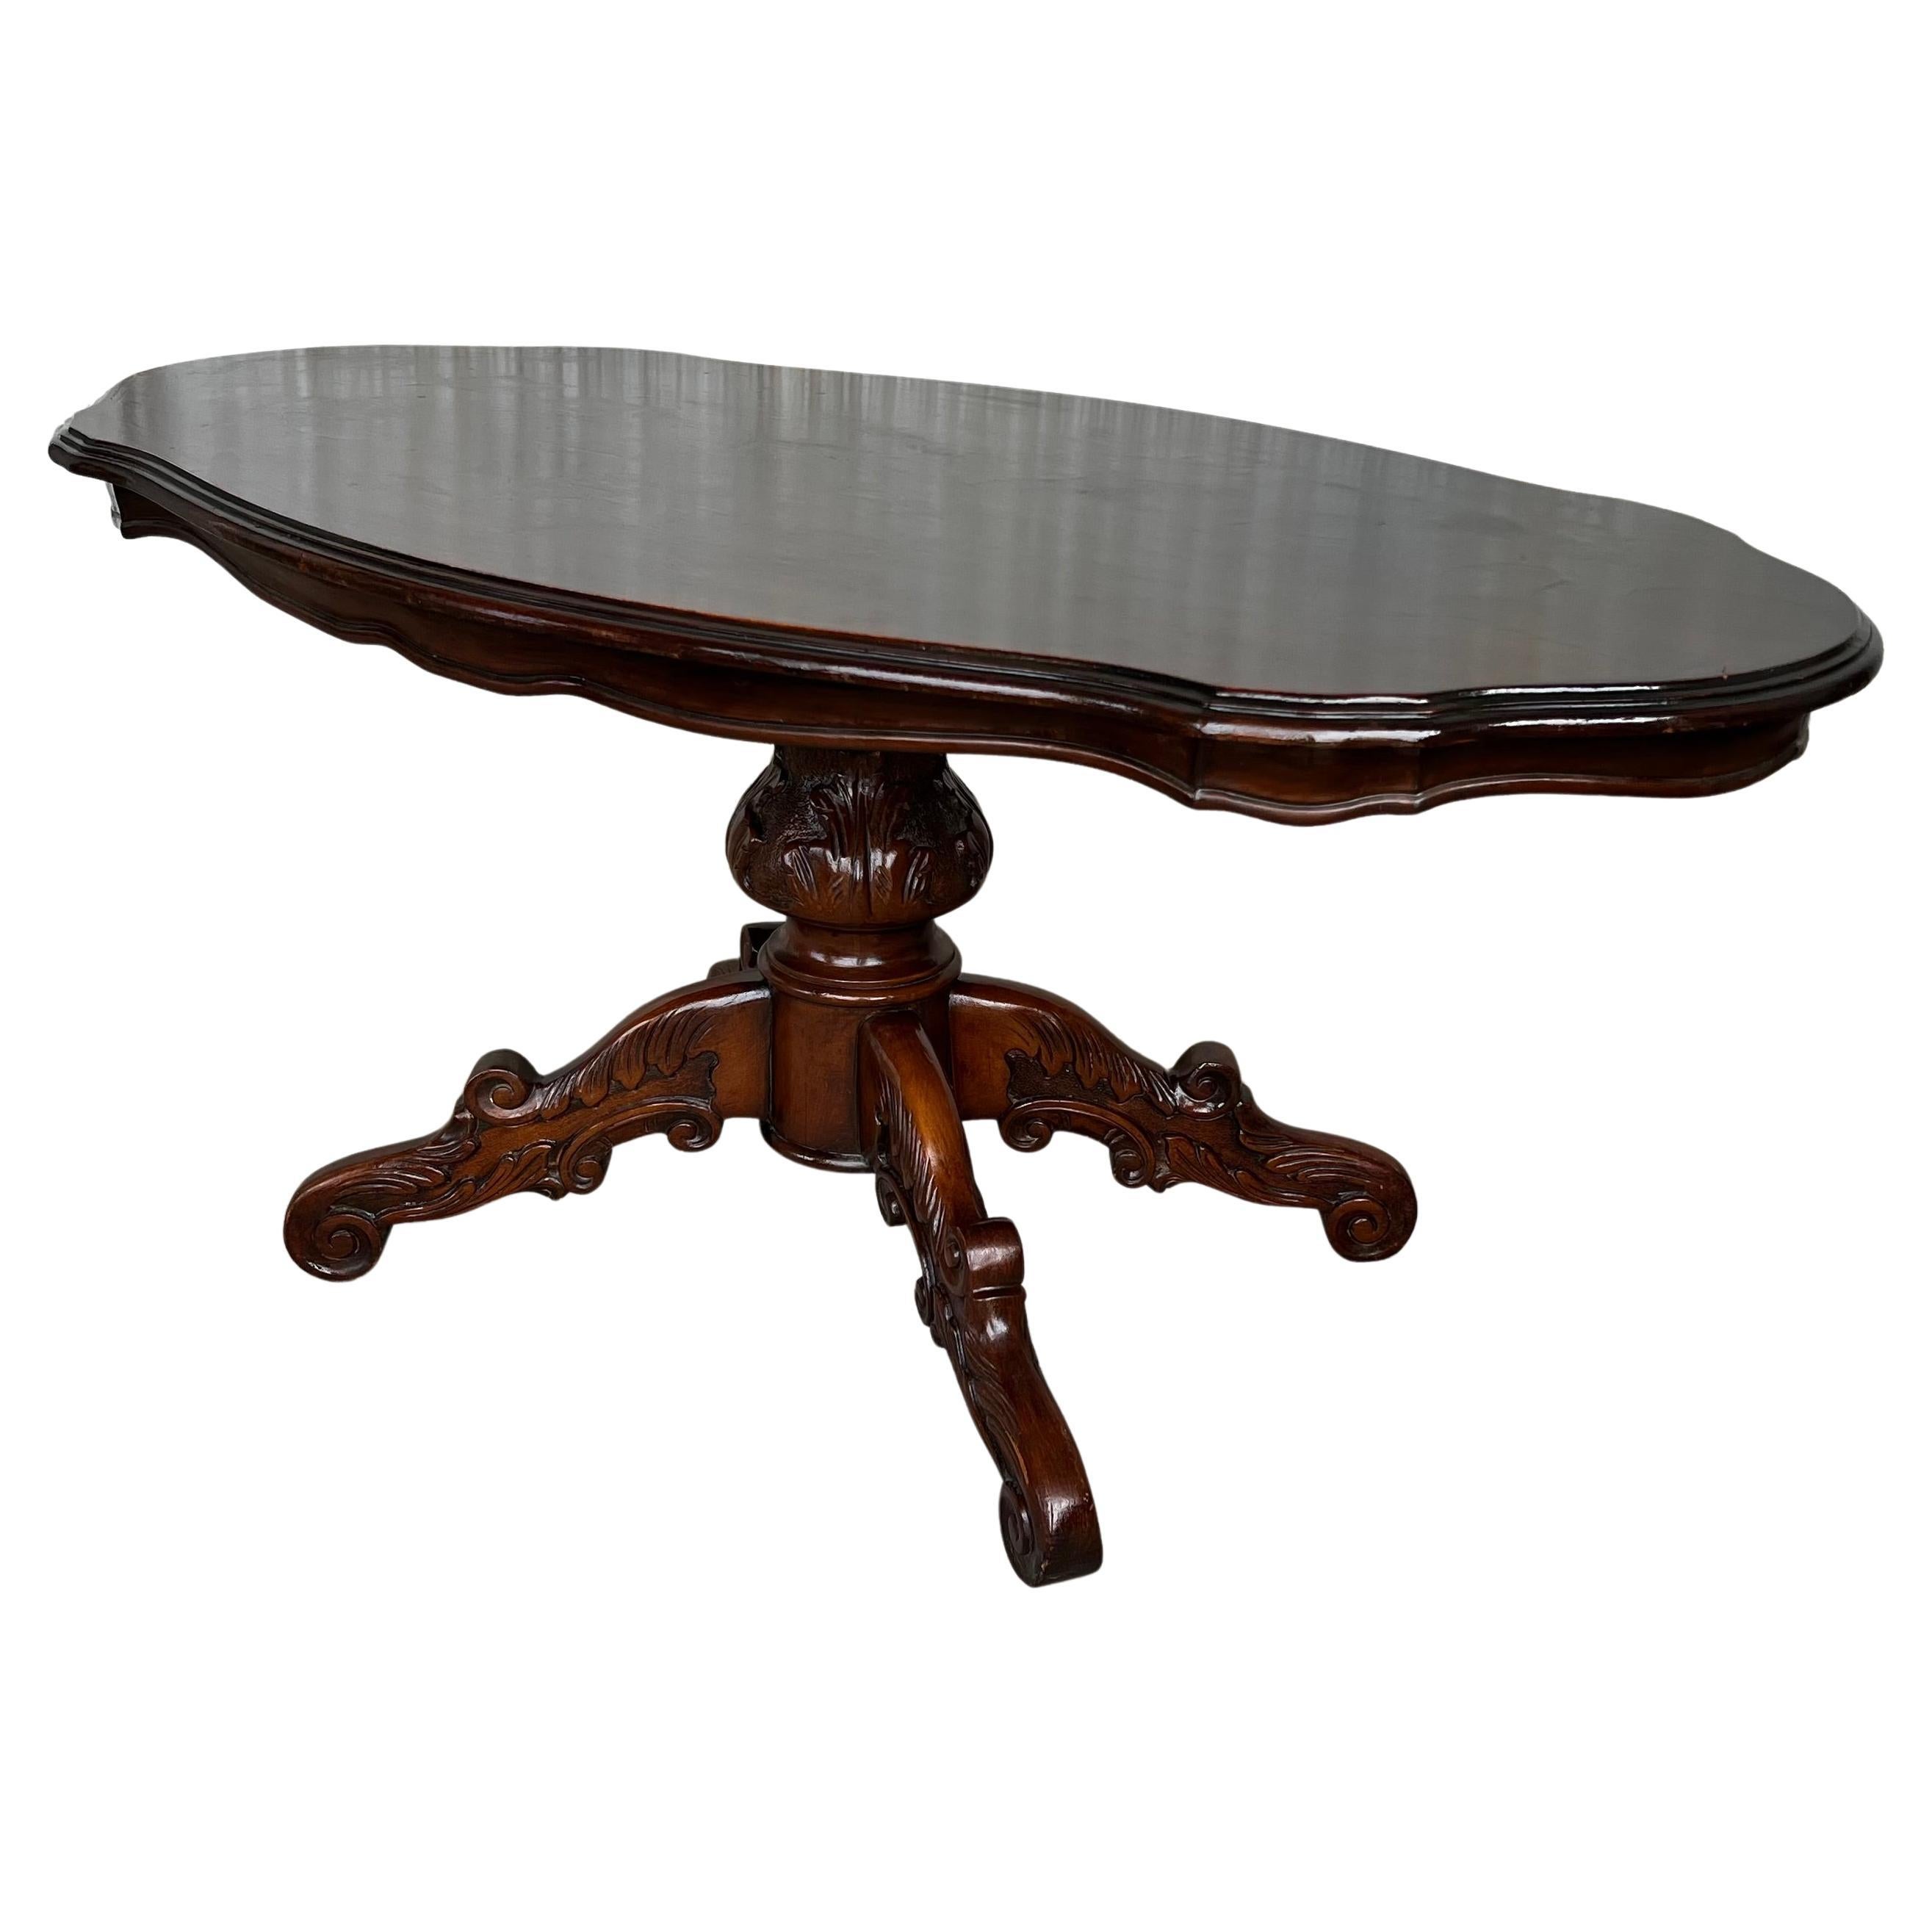 20th Century Spanish Mariano Garcia Carved Pedestal Coffee Table